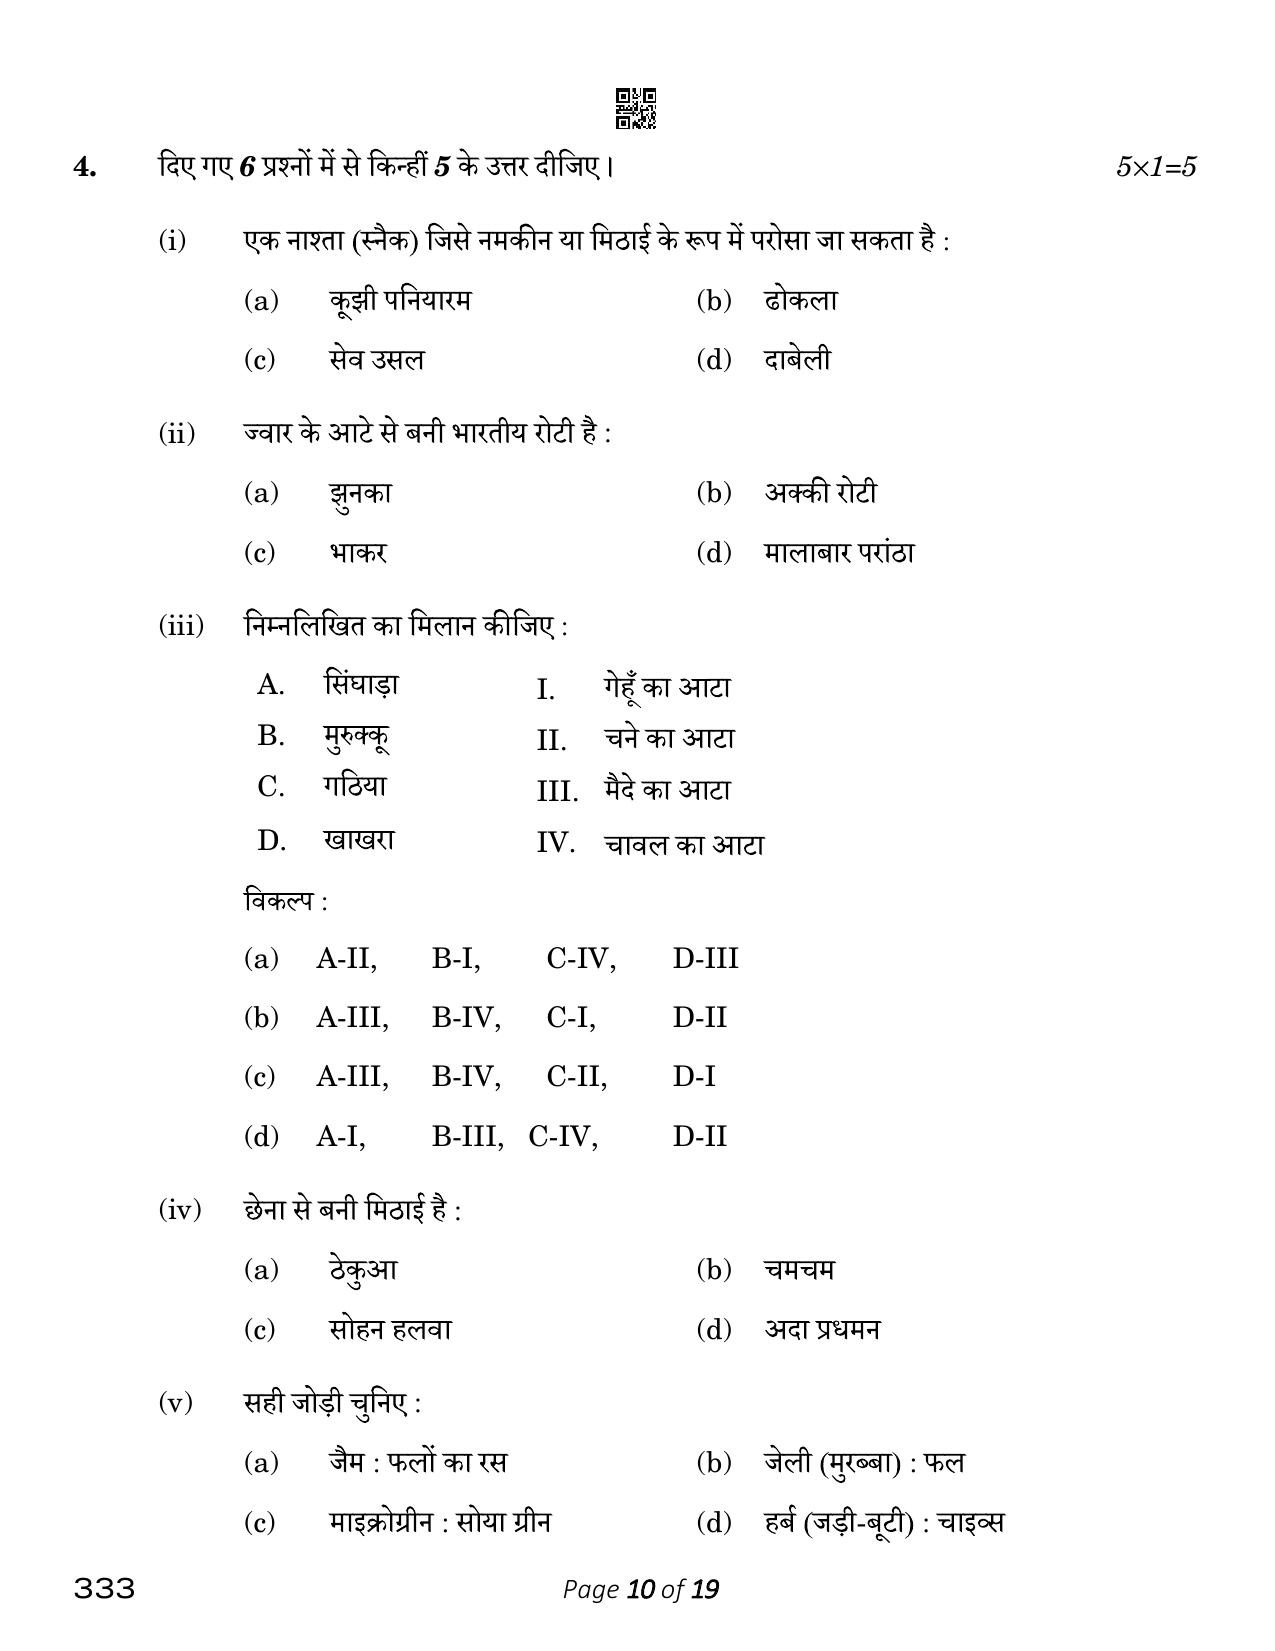 CBSE Class 12 food Production (Compartment) 2023 Question Paper - Page 10